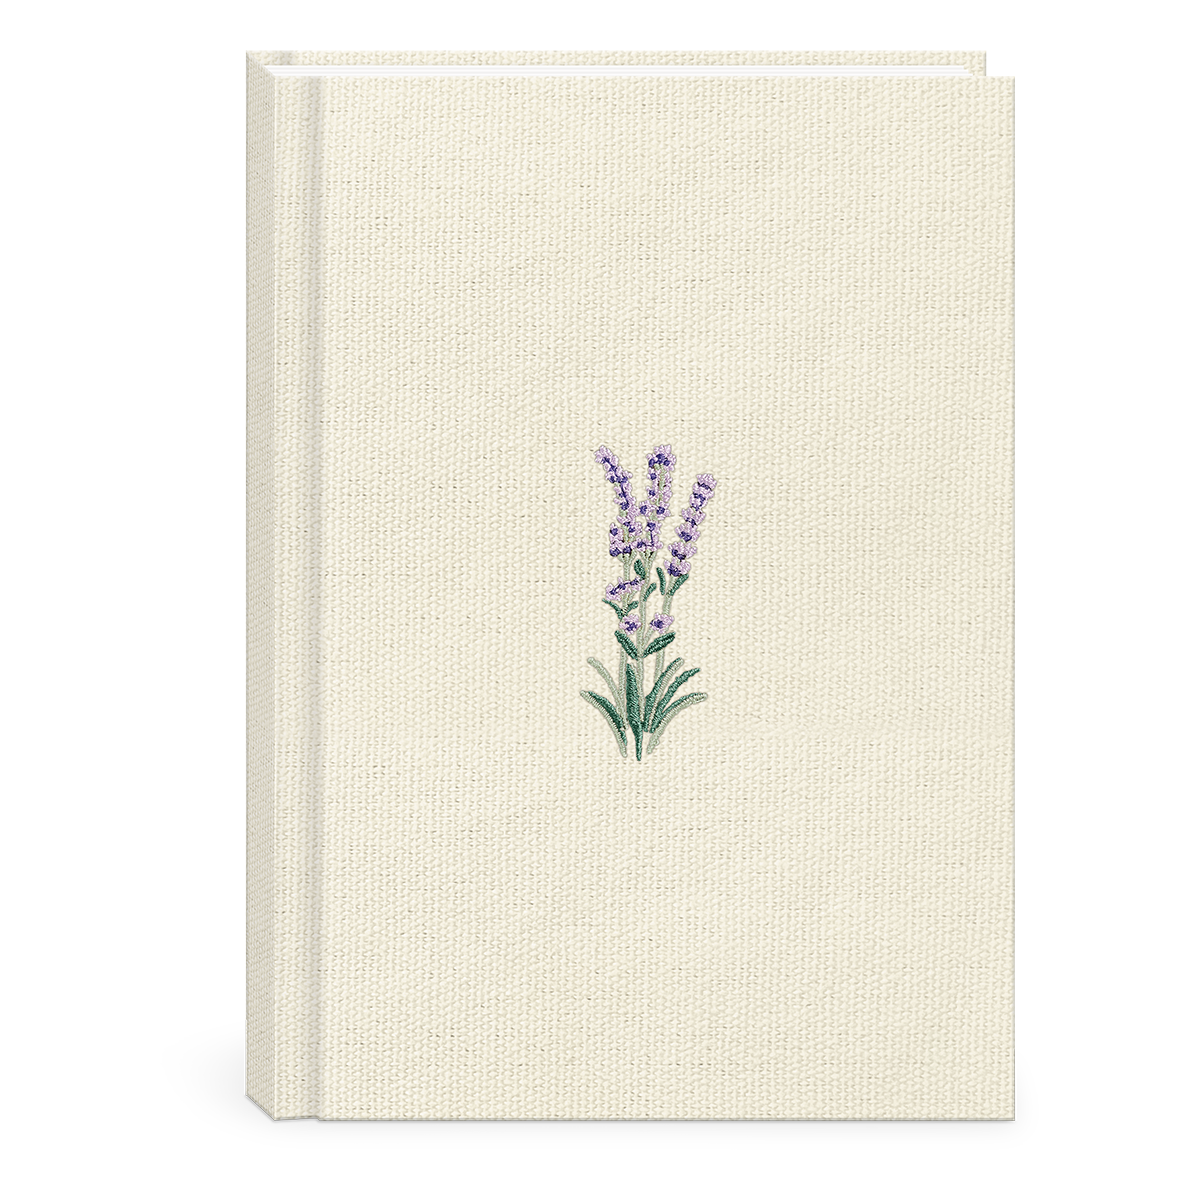 Delicate Floral Cream Fabric Journal Product